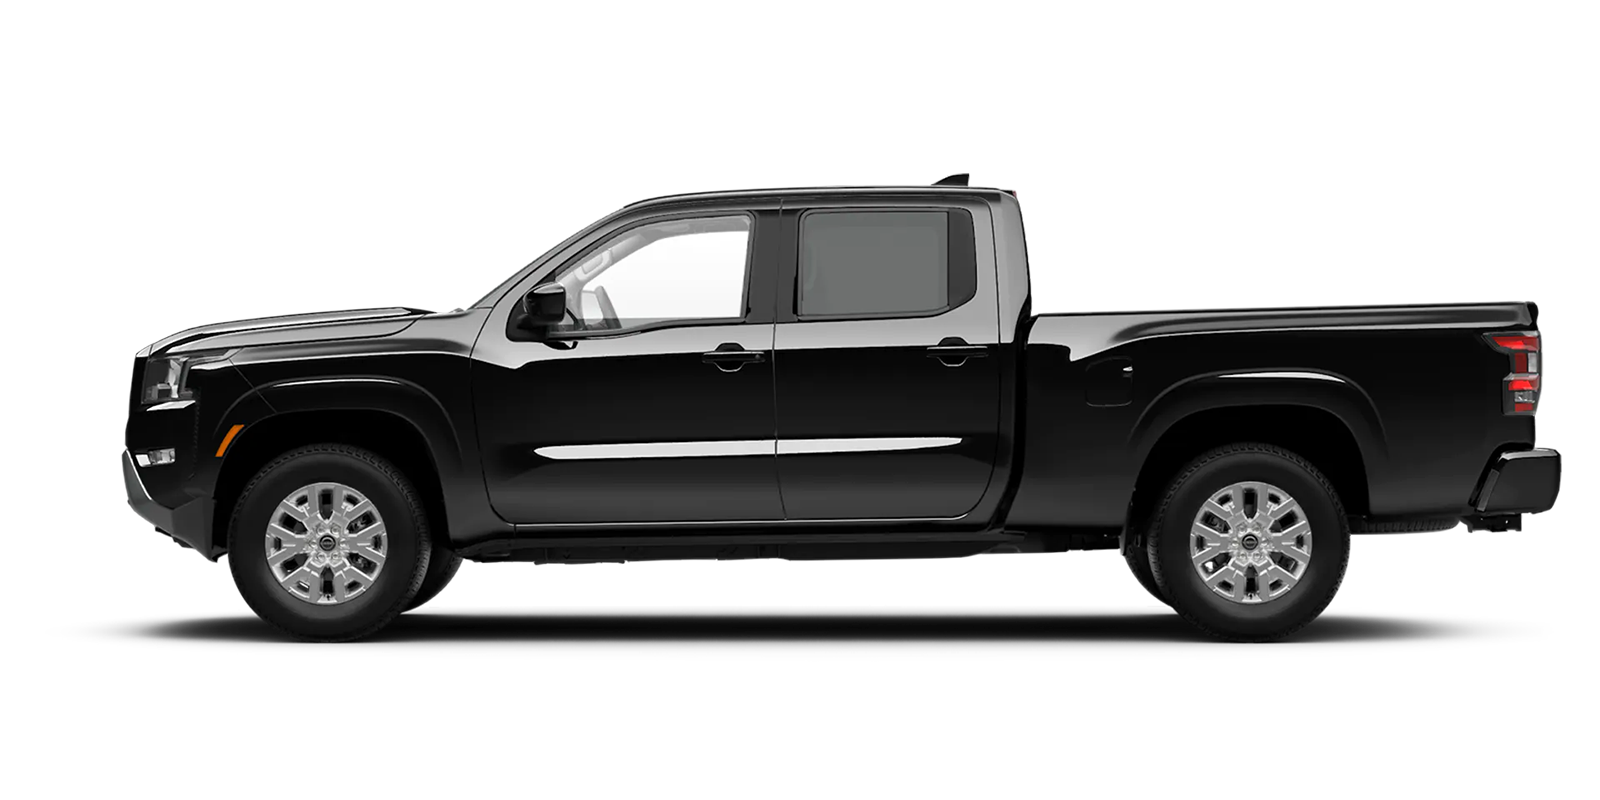 2022 Frontier Crew Cab Long Bed SV 4x4 in Super Black | Cole Nissan in Pocatello ID